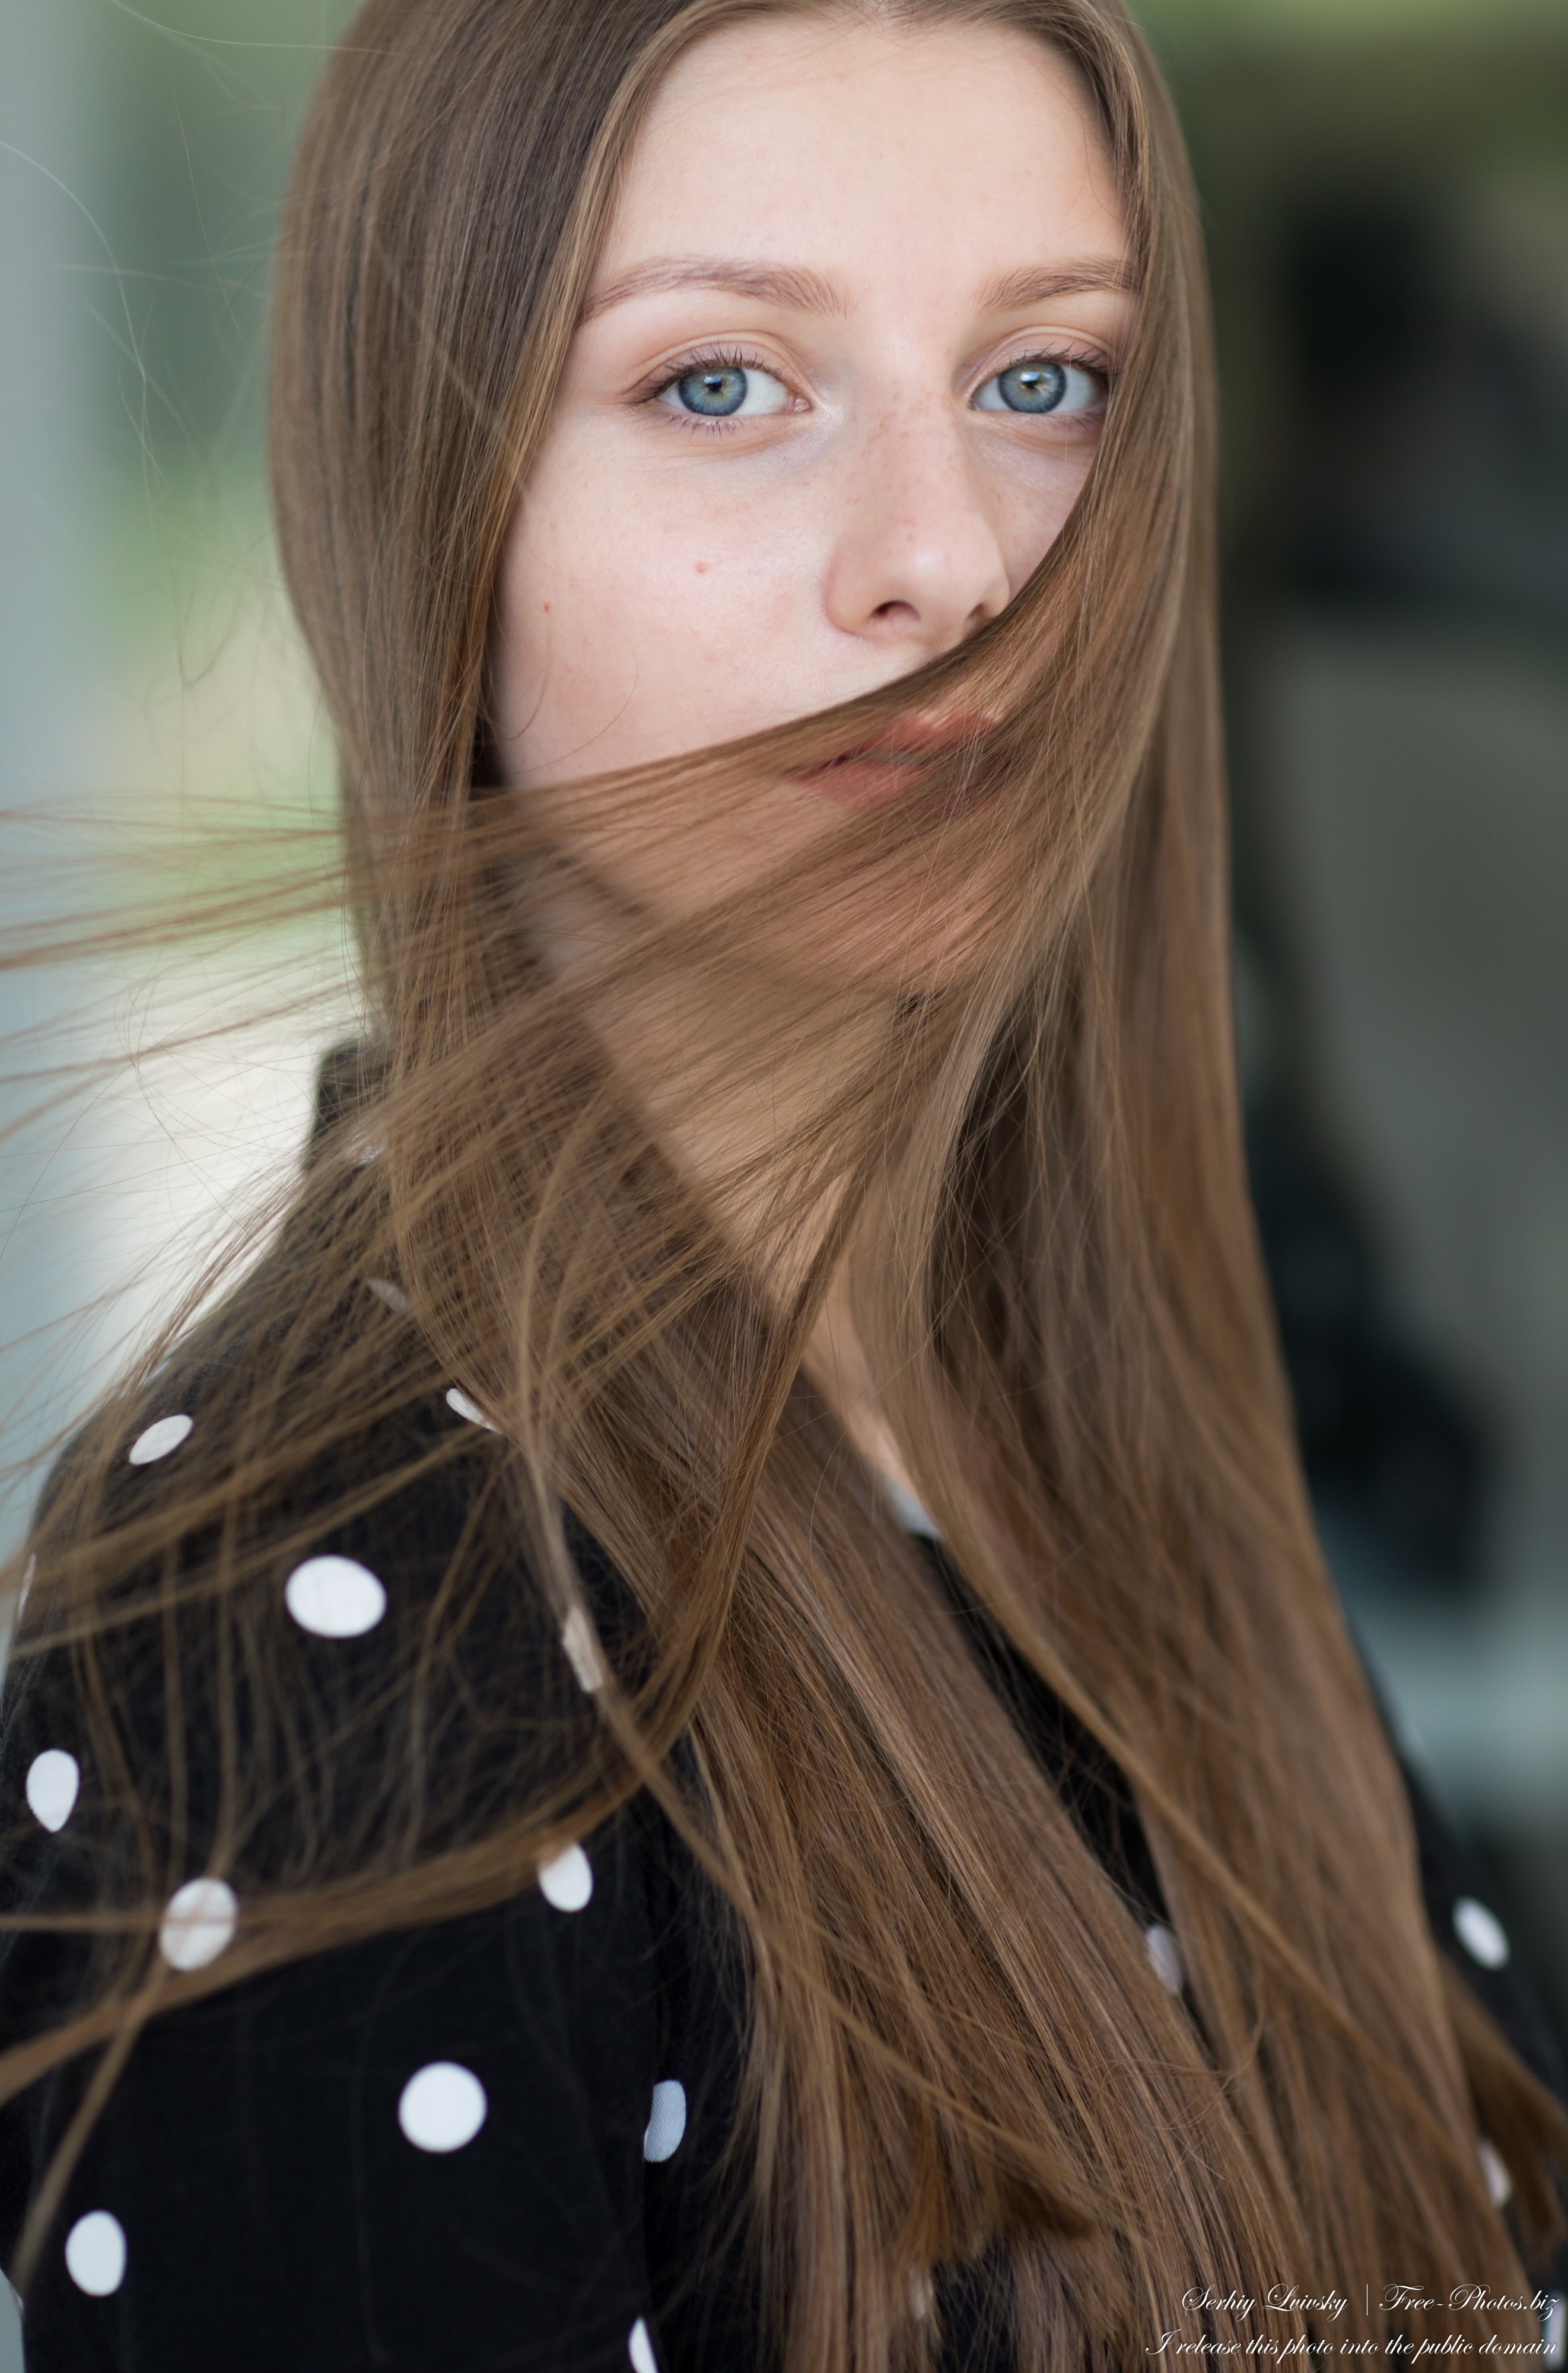 Inna - an 18-year-old natural fair-haired girl photographed in July 2020 by Serhiy Lvivsky, picture 17